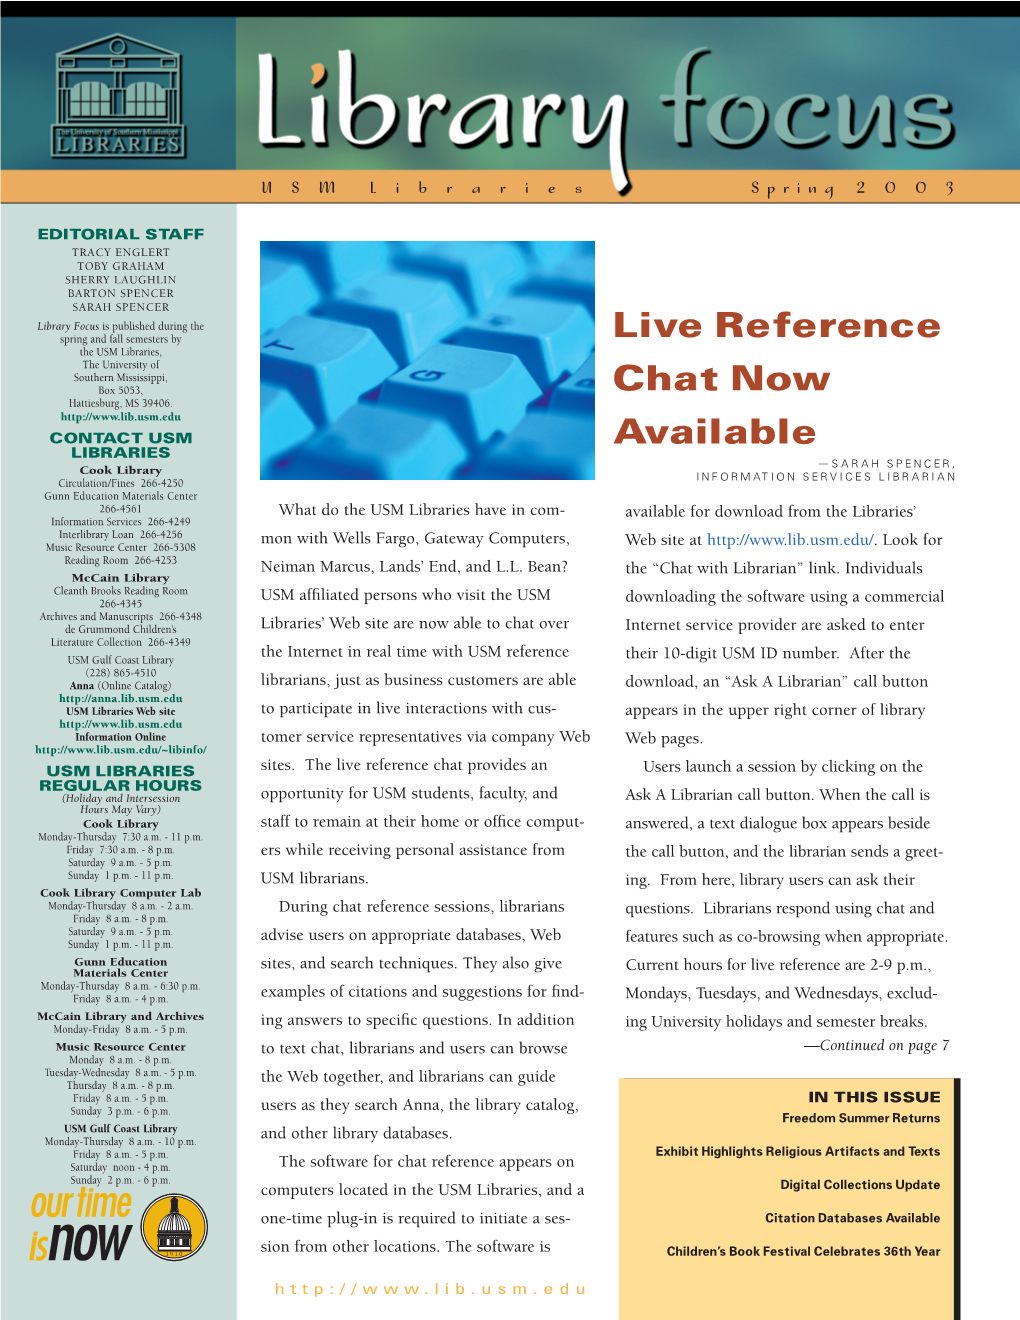 Live Reference Chat Now Available